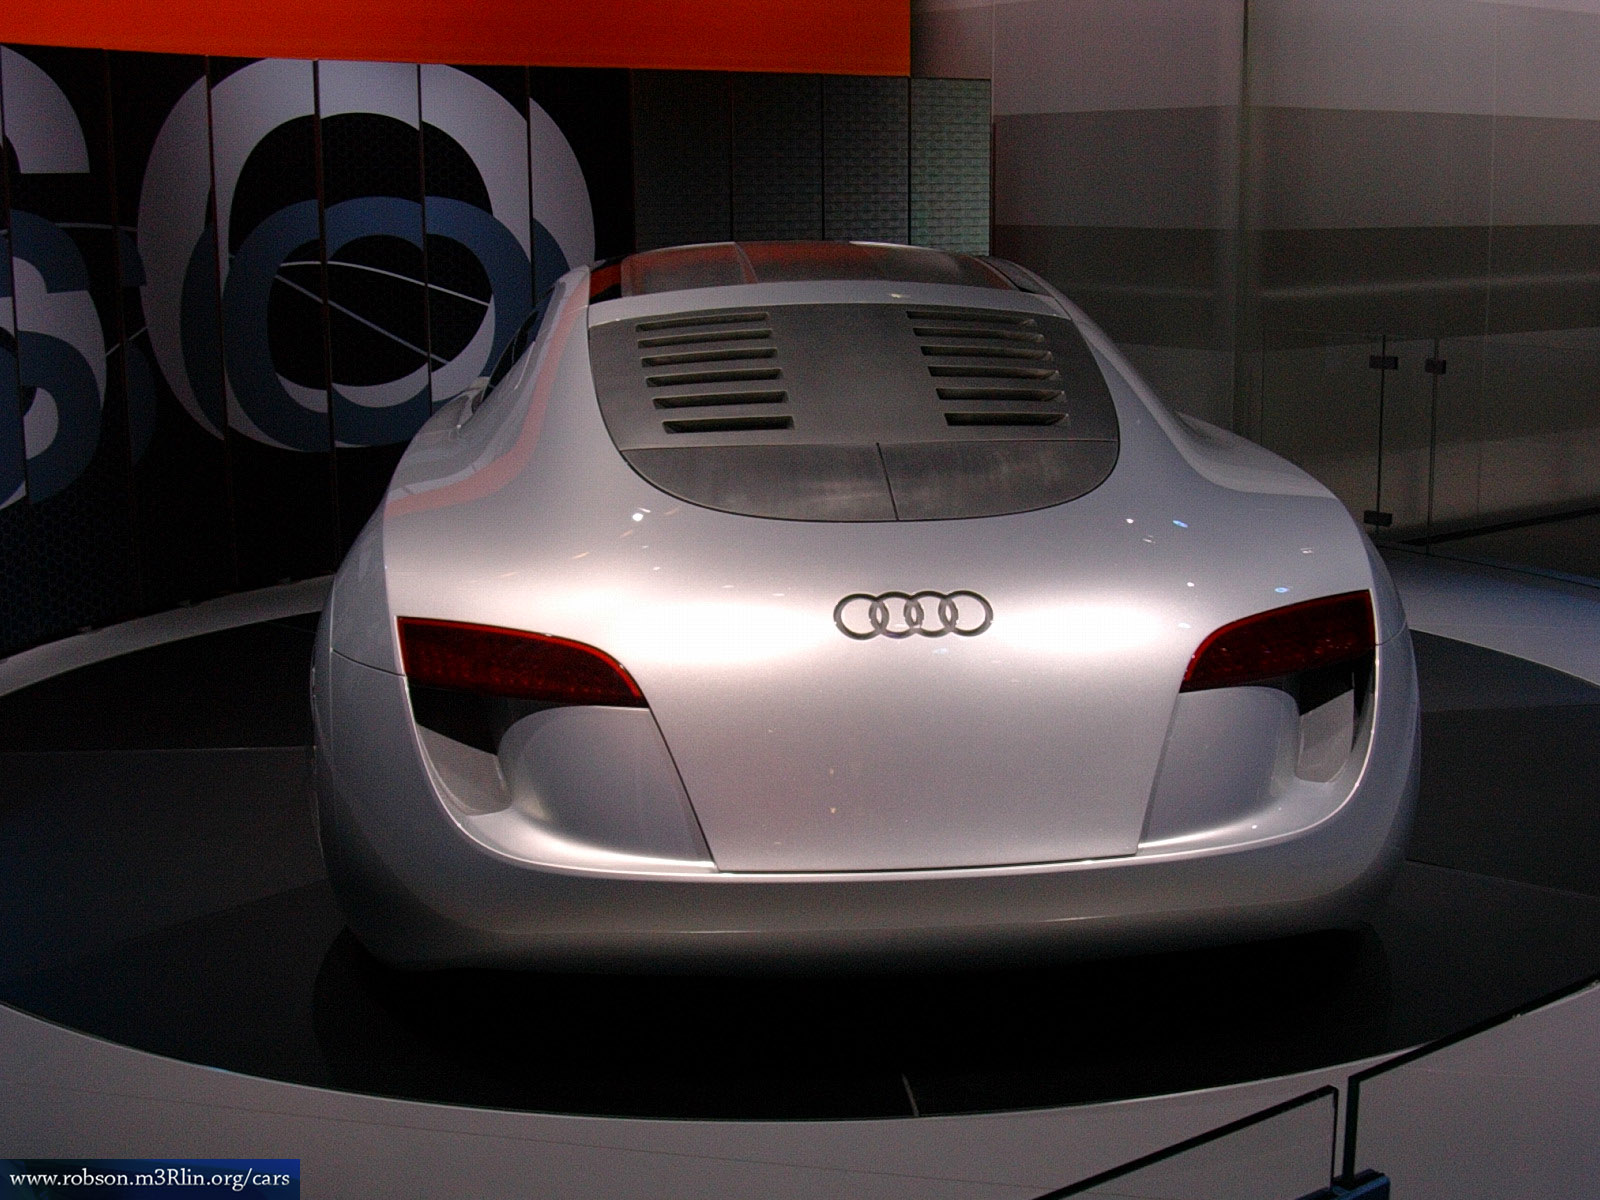 Audi RSQ Concept Car 2004 Cars - Pictures & Wallpapers 